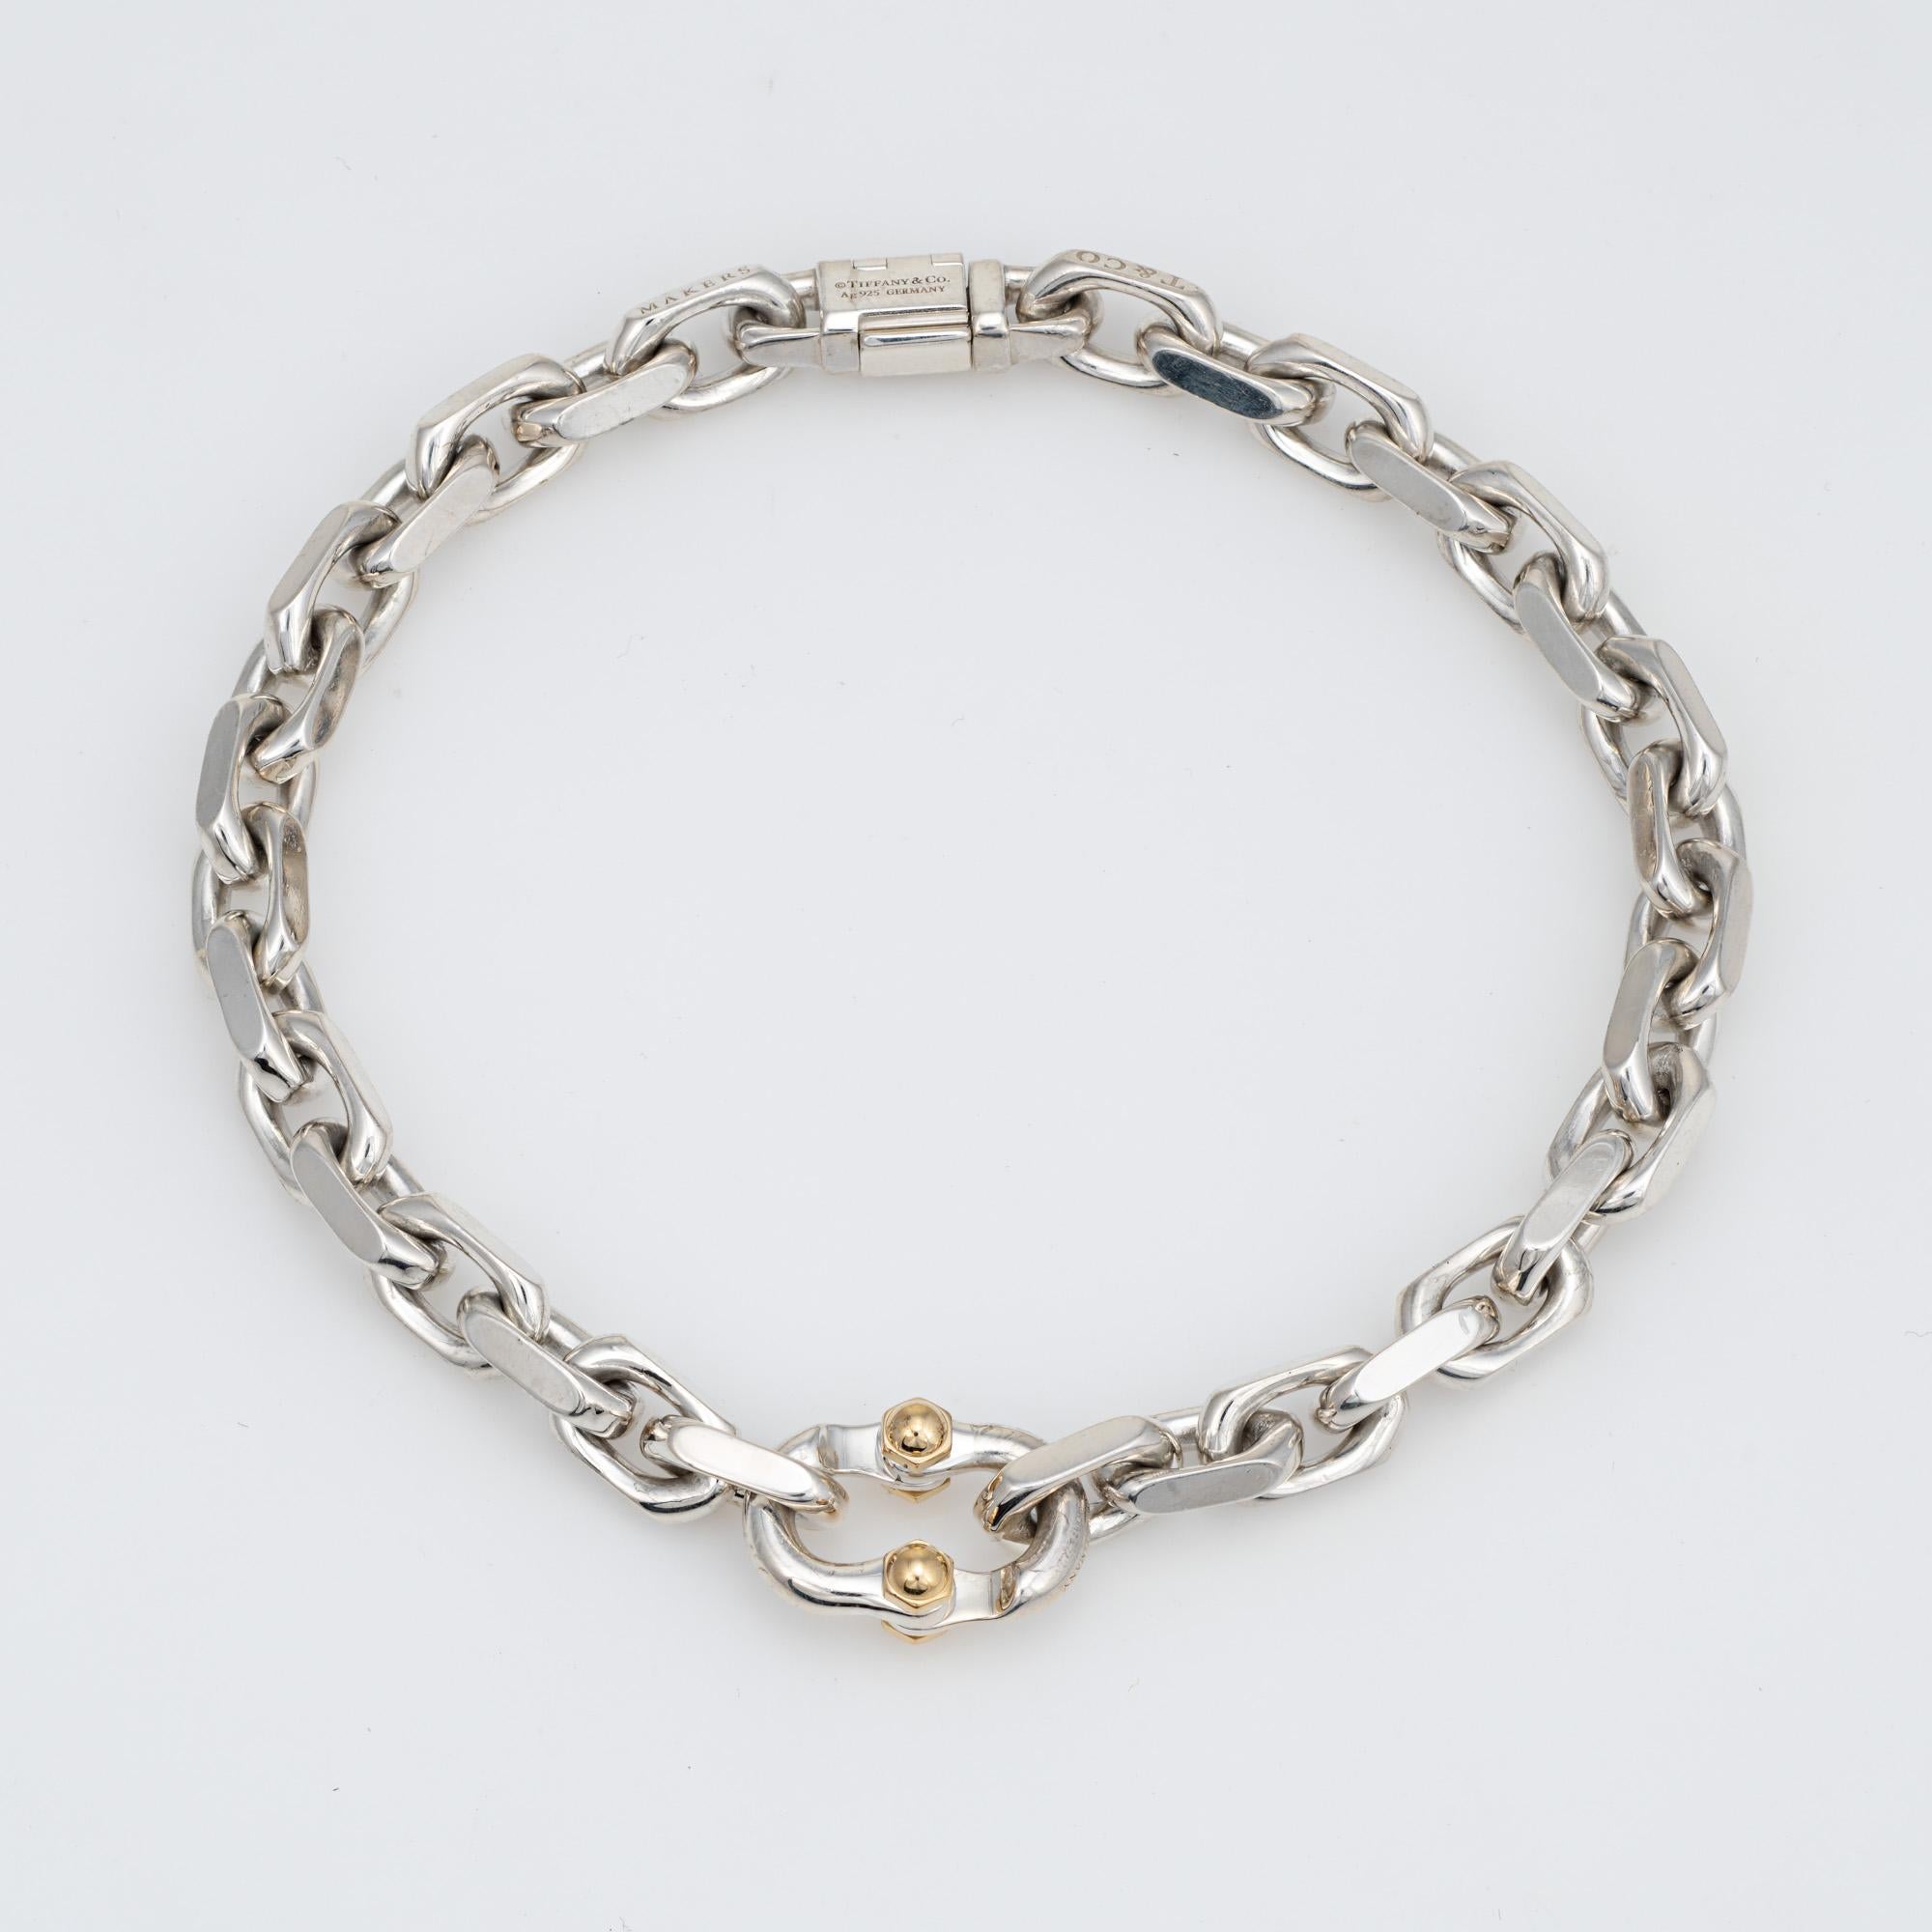 Stylish and finely detailed pre-owned Tiffany & Co Makers bracelet, crafted in sterling silver & 18 karat yellow gold.  

The bracelet features a utilitarian design with a Makers symbol inspired by the renowned Hollowware shop. Measuring 7 inches in